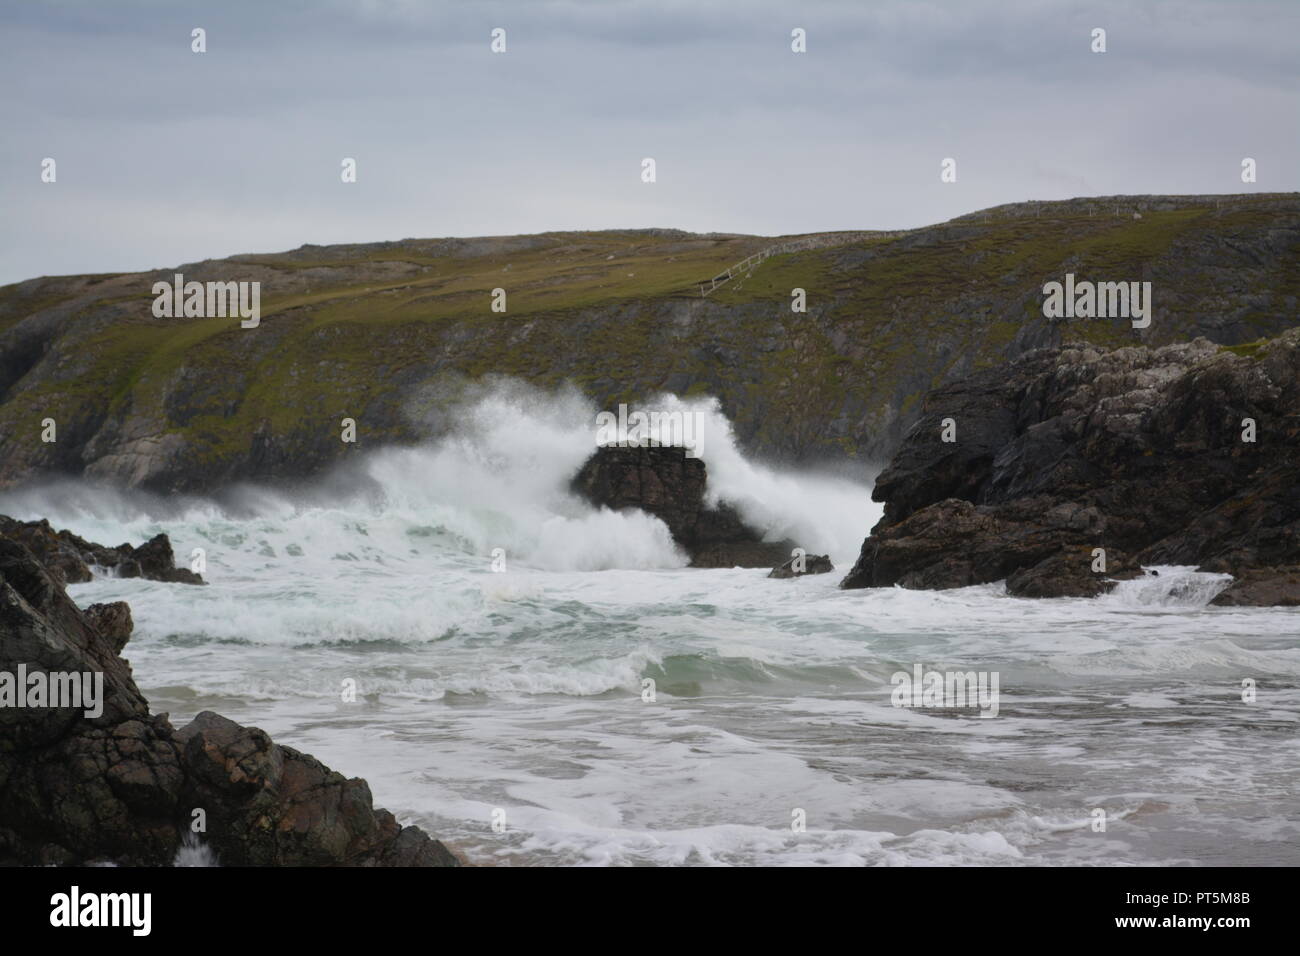 Waves crashing into the rocks close to the shoreline on a stormy and windy overcast and rainy autumn day with rocky coastline in the background UK Stock Photo